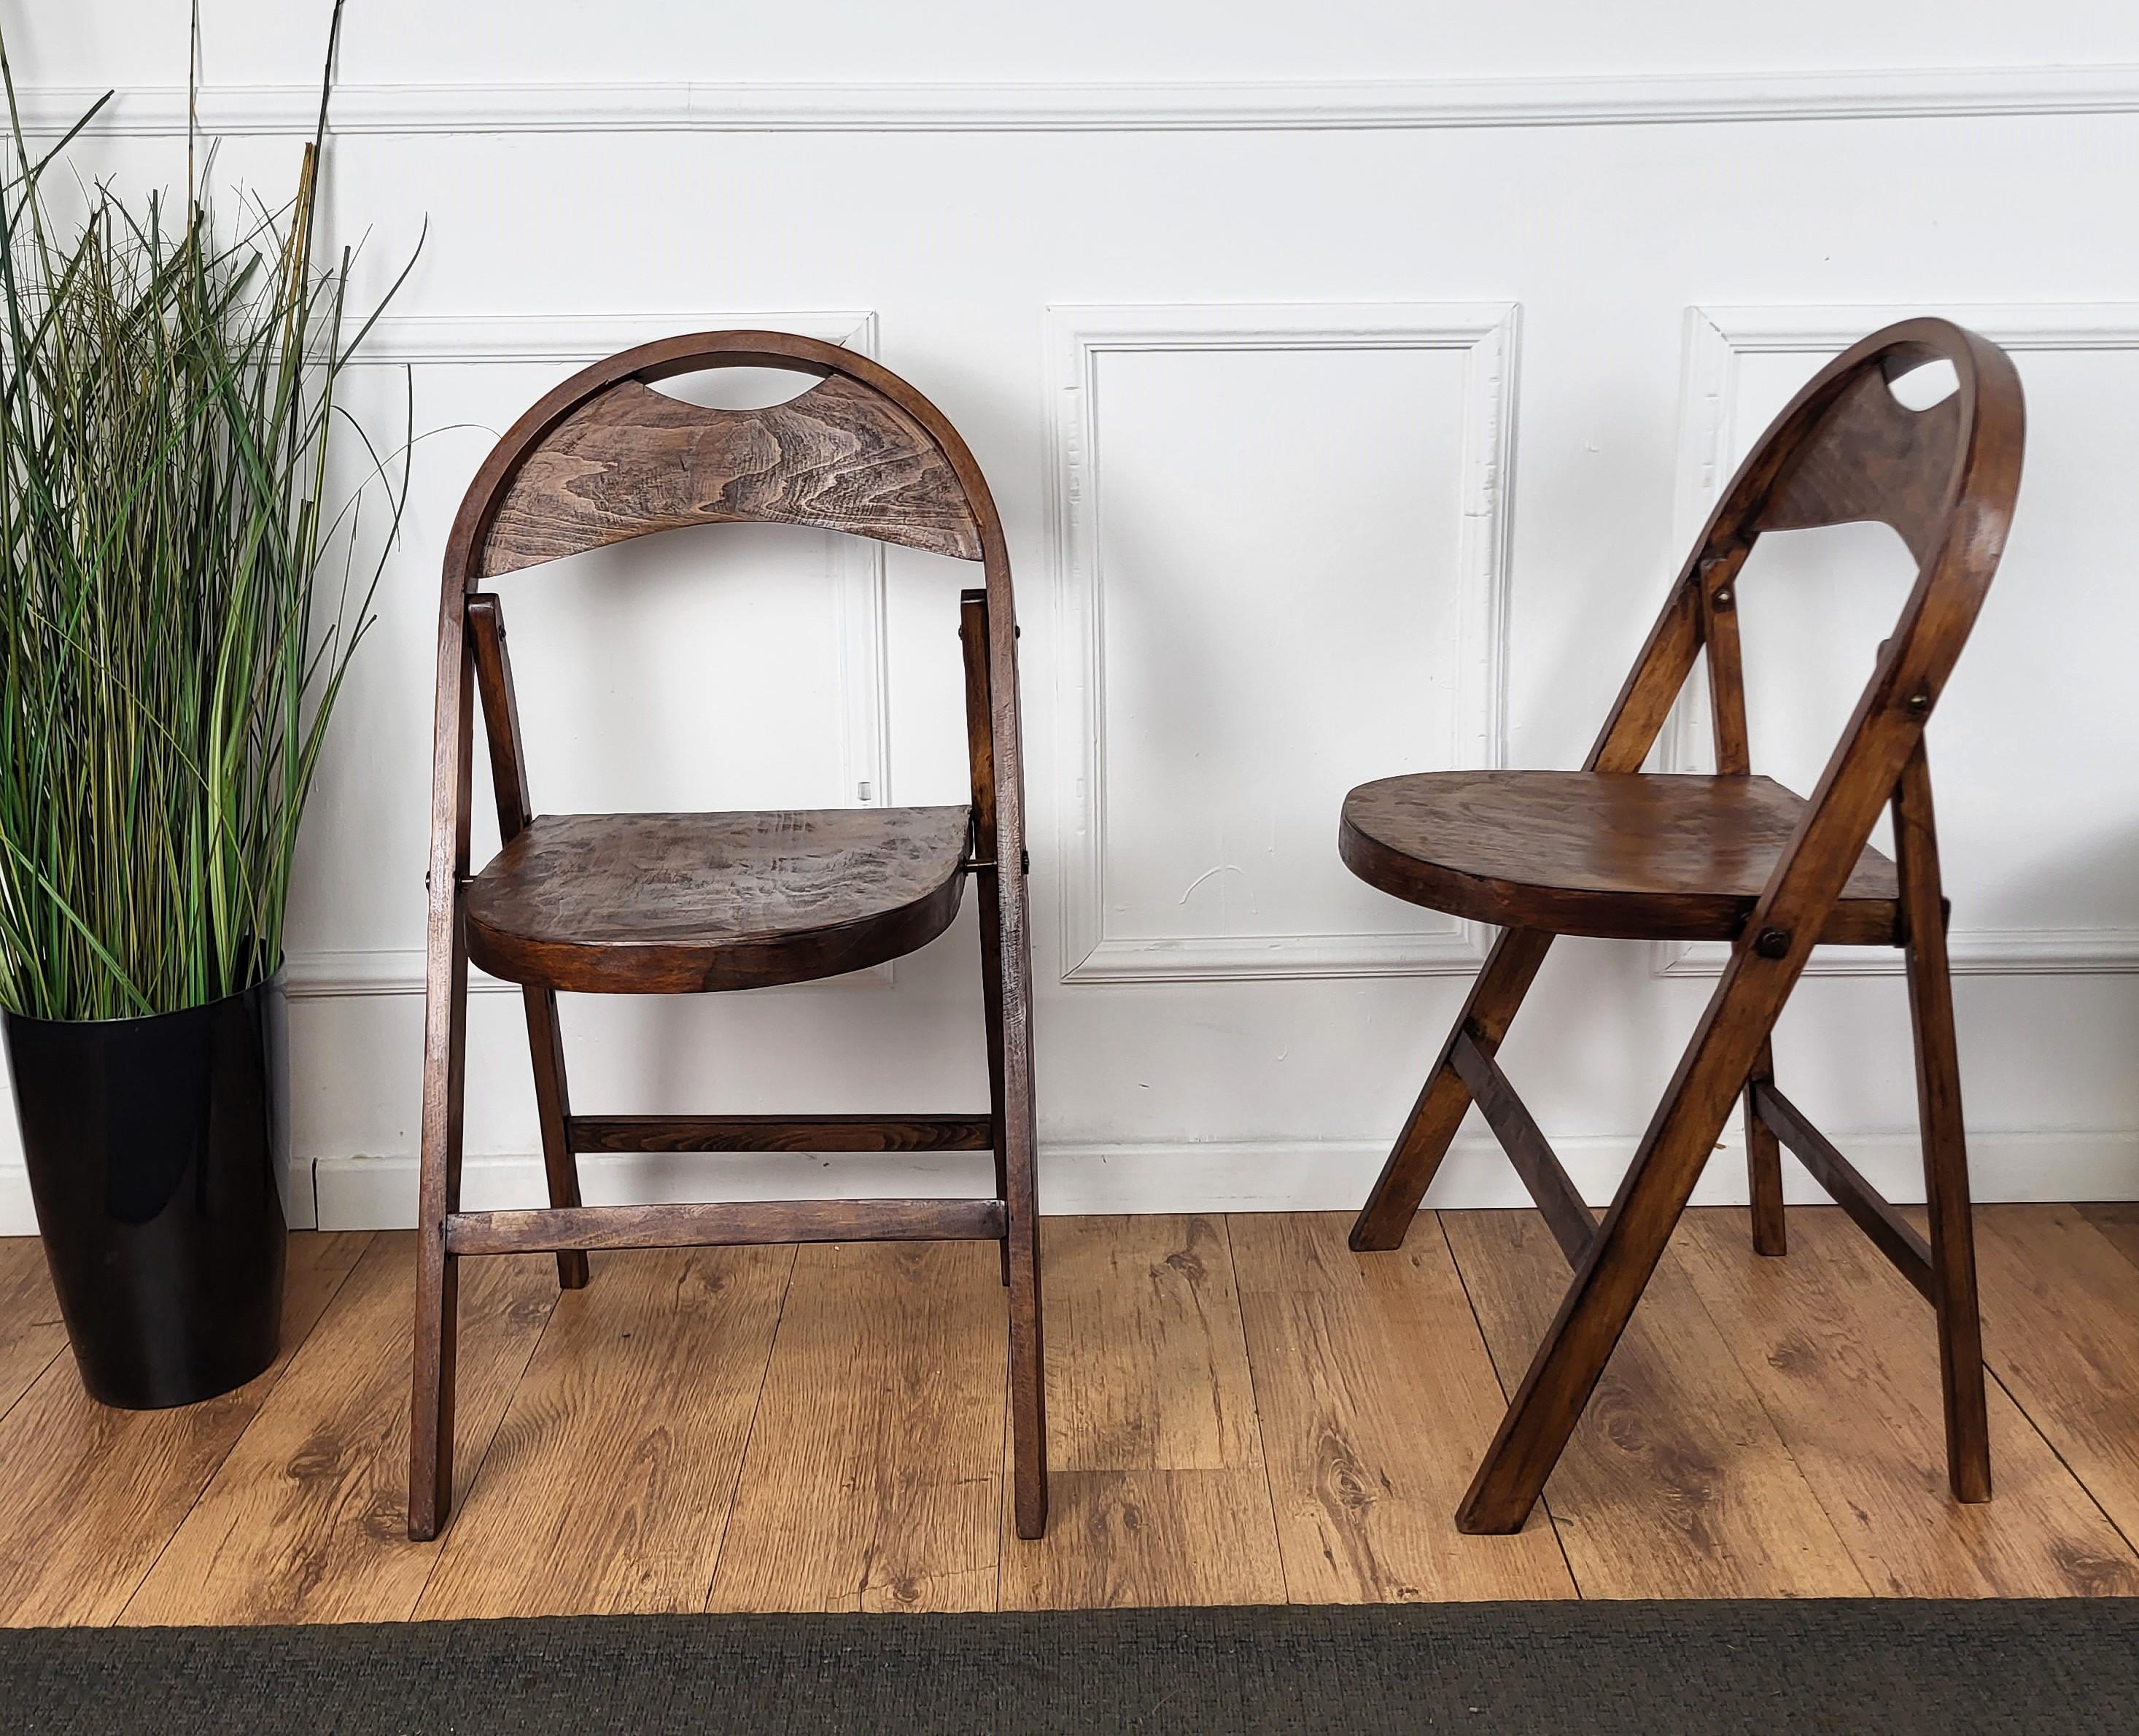 Pair of folding chairs model B751 designed at the beginning of the 20th century by Thonet, manufactured in the early 1960s at the Thonet factory in Radomsko (central Poland). Chairs are in good condition, without major sign of use . Made of